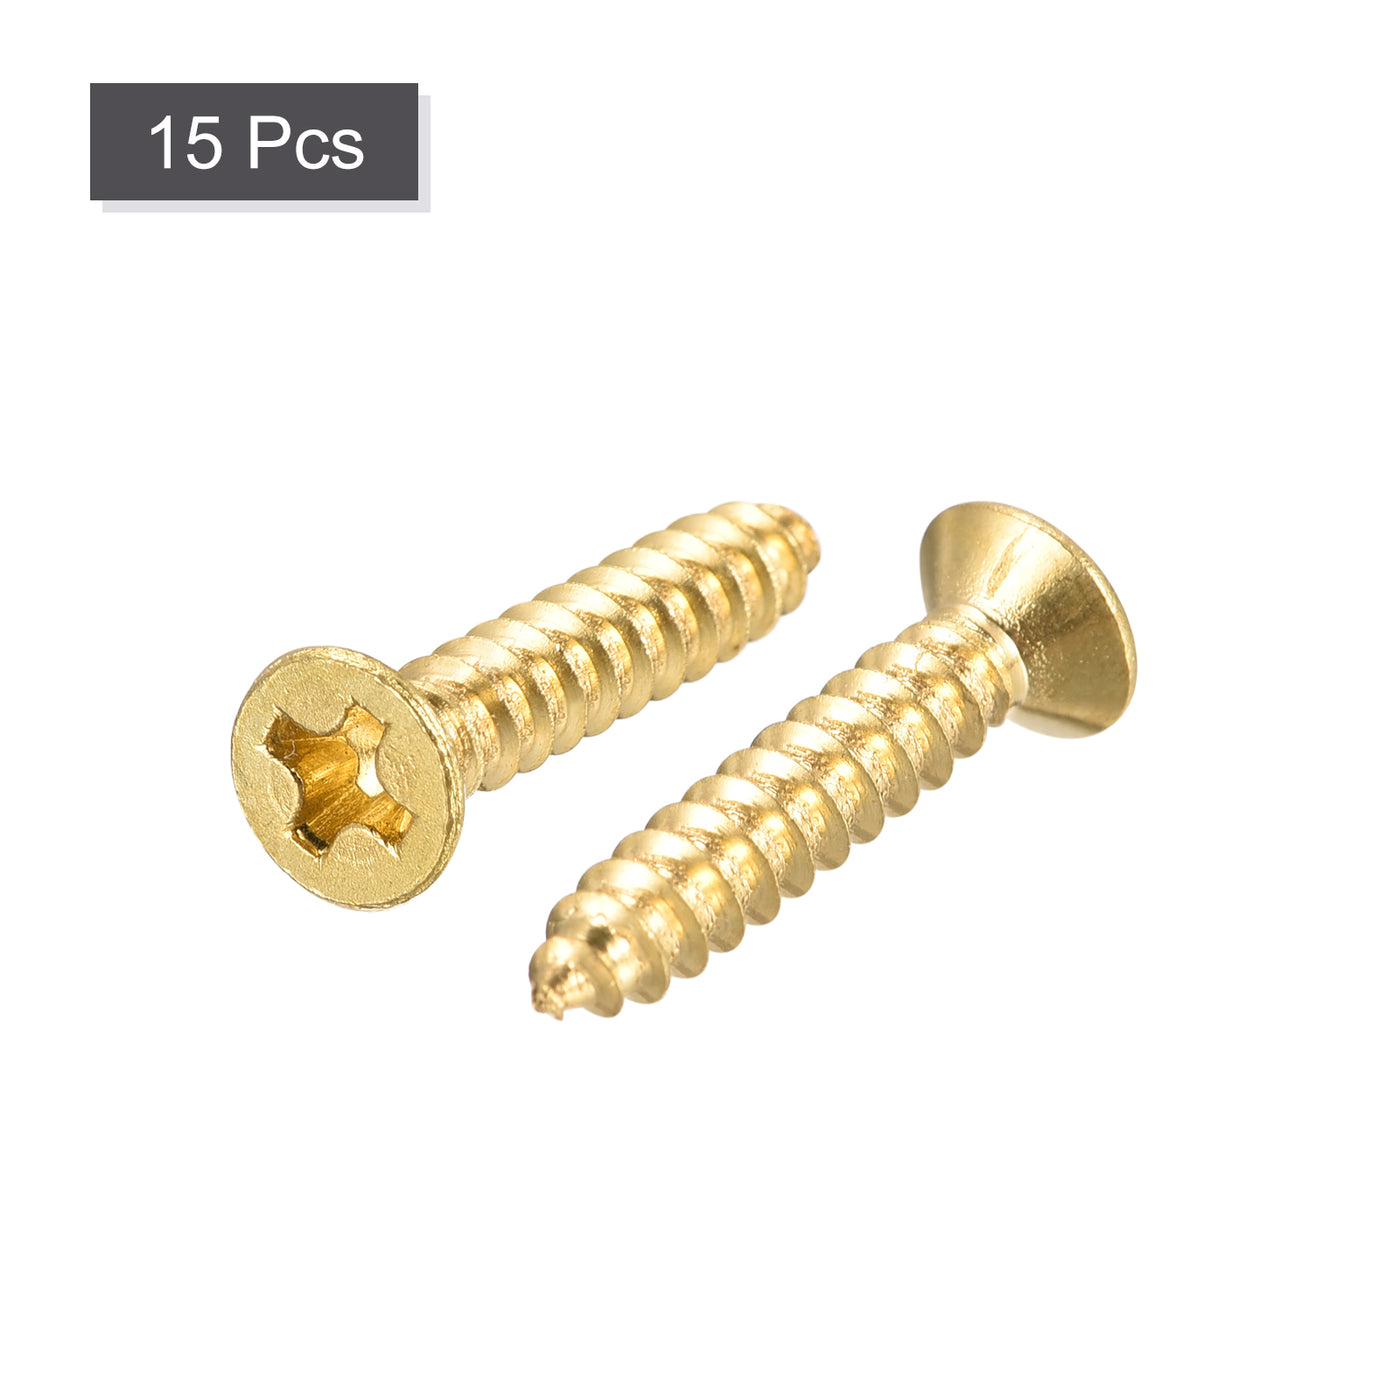 uxcell Uxcell Brass Wood Screws, M3.5x20mm Phillips Flat Head Self Tapping Connector for Door, Cabinet, Wooden Furniture 15Pcs